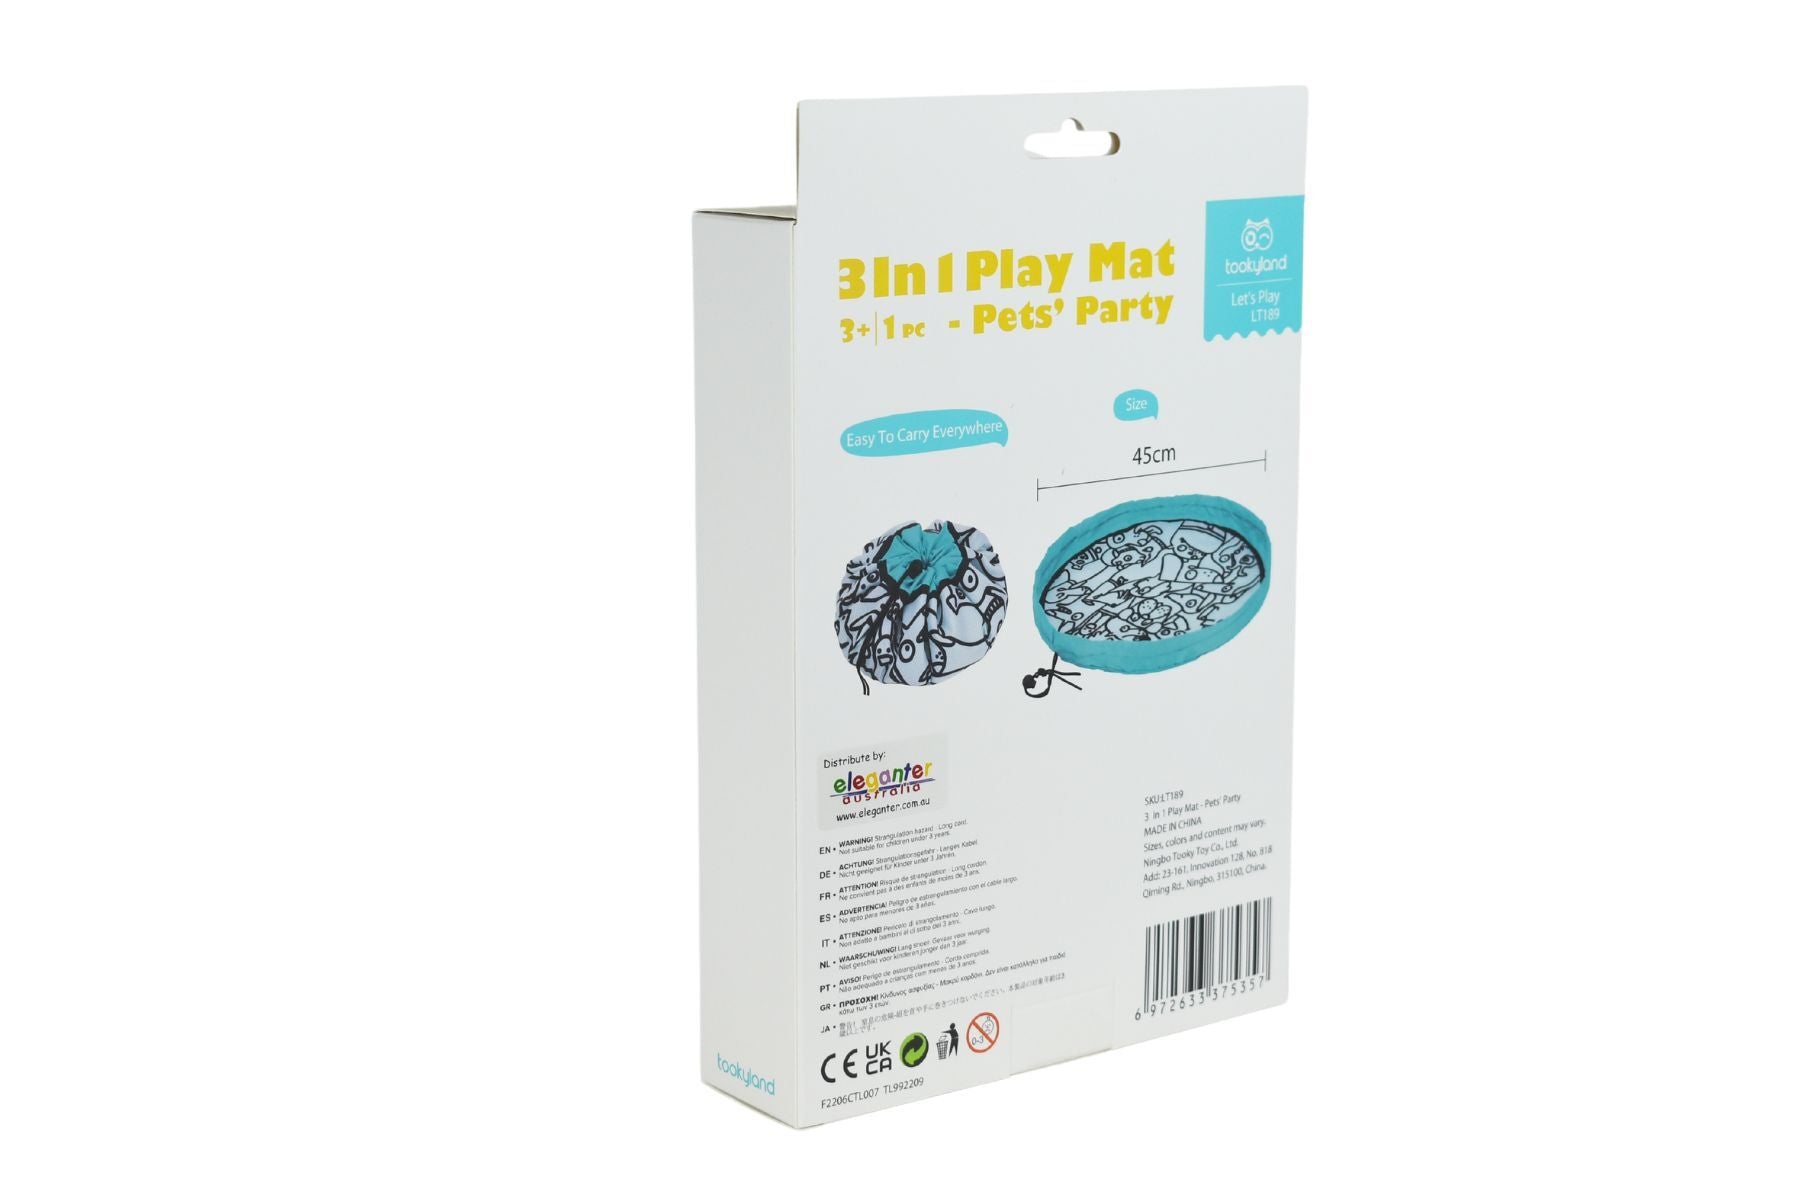 3 In 1 Play Mat – Pet's Party